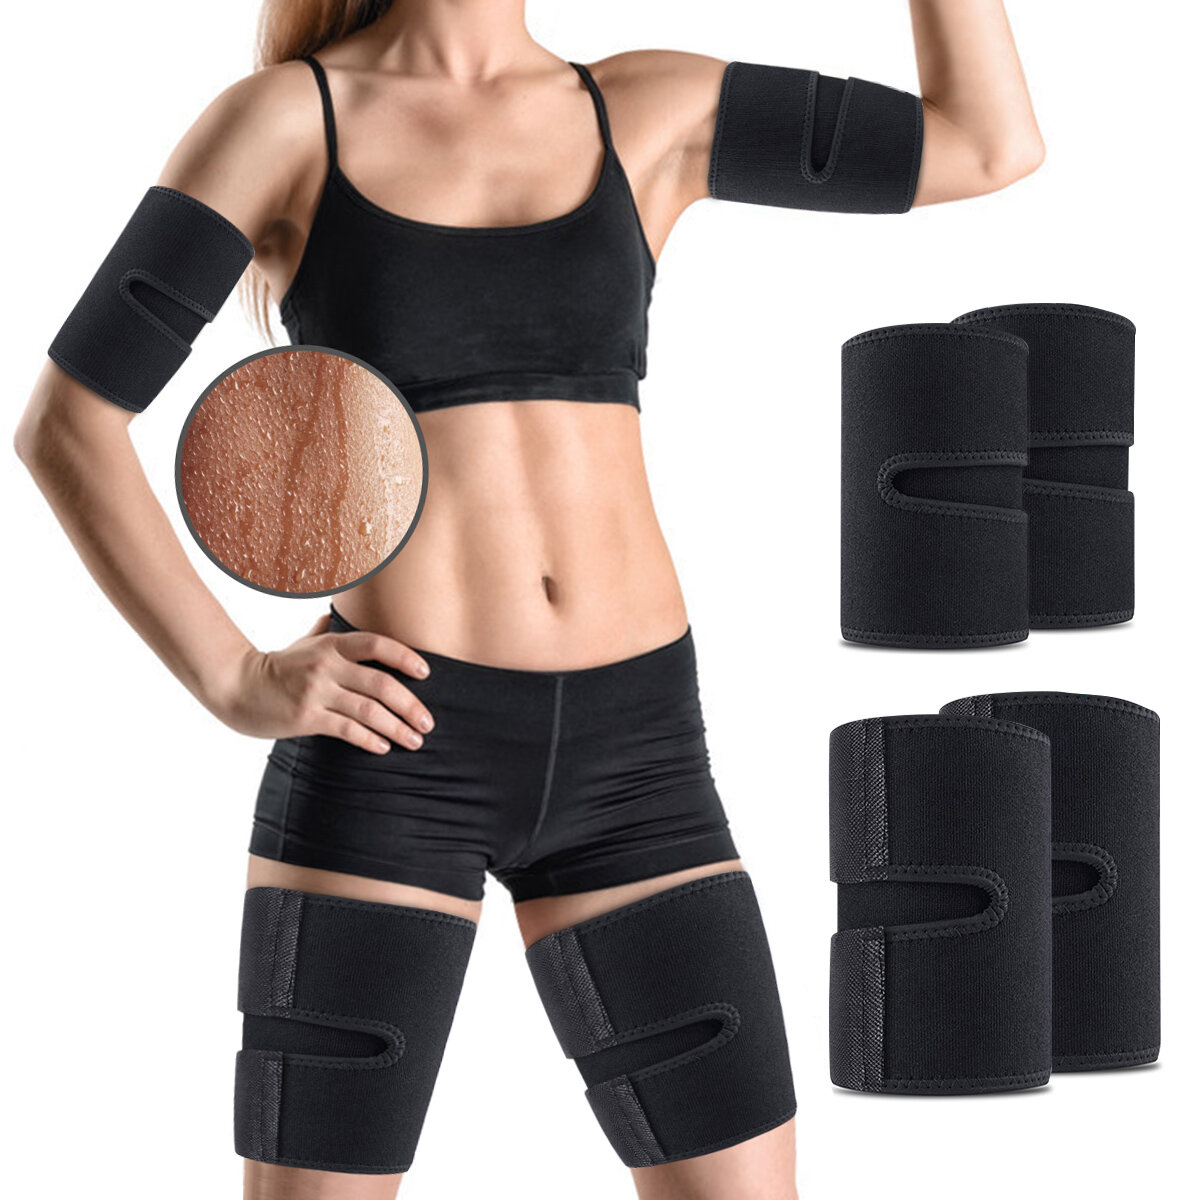 OUTERDO 4PCS Kit Arm and Thigh Sport Protective Straps Trimmers Tape Body Exercise Wraps Adjustable Improve Sweating for